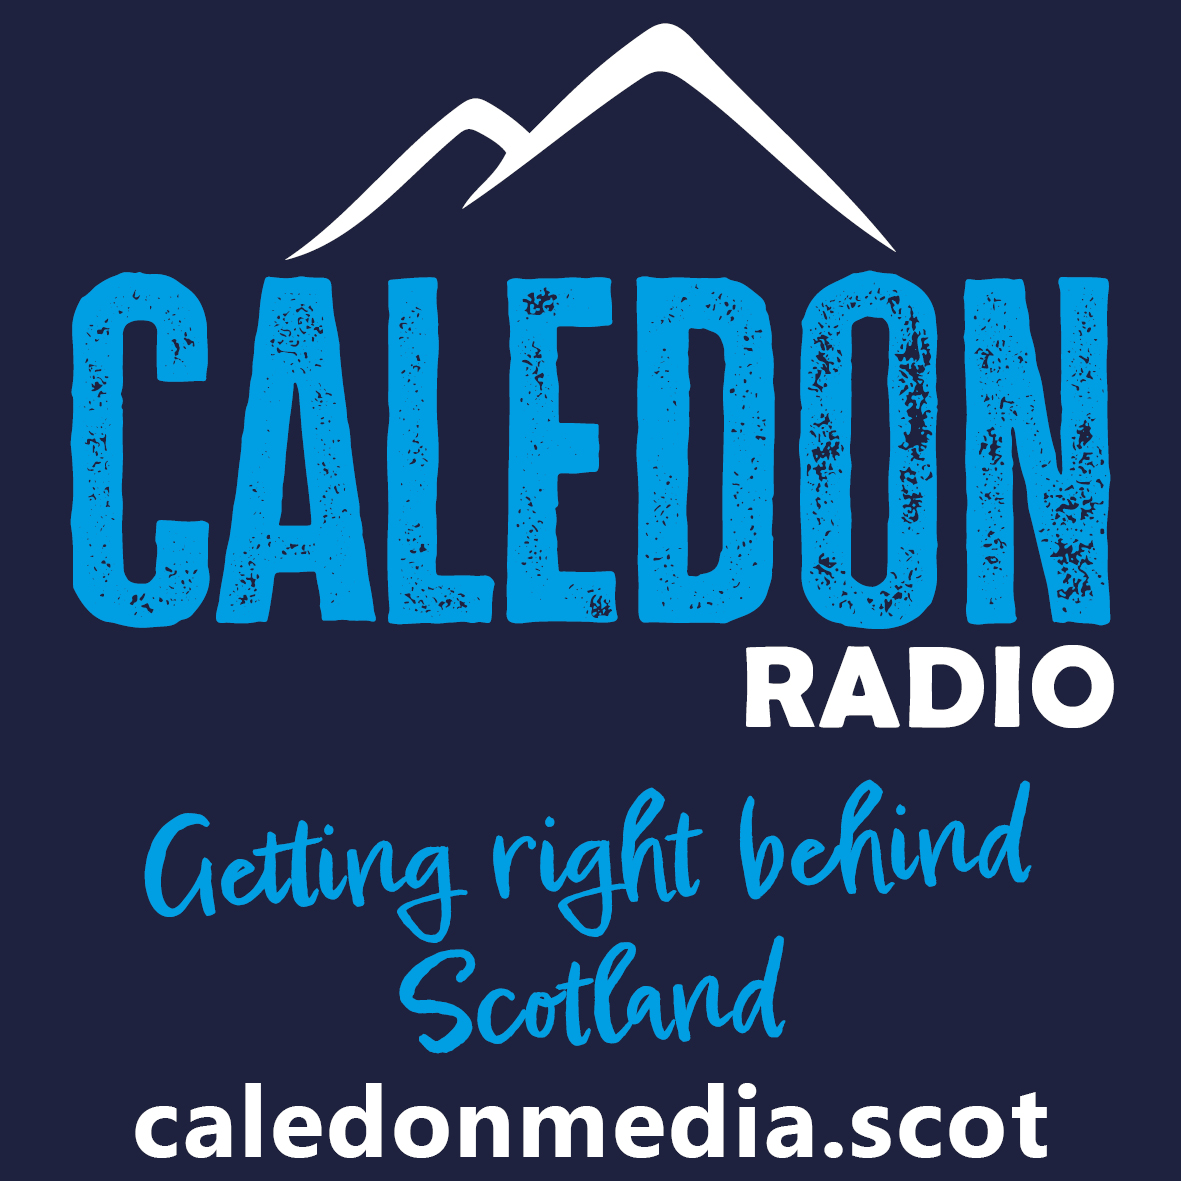 We will return broadcasting on the 21st May to give a critical look at politics from all angles. Our remit is to advocate for independence and to promote Scottish culture. We hope to get more listeners with everyones help.